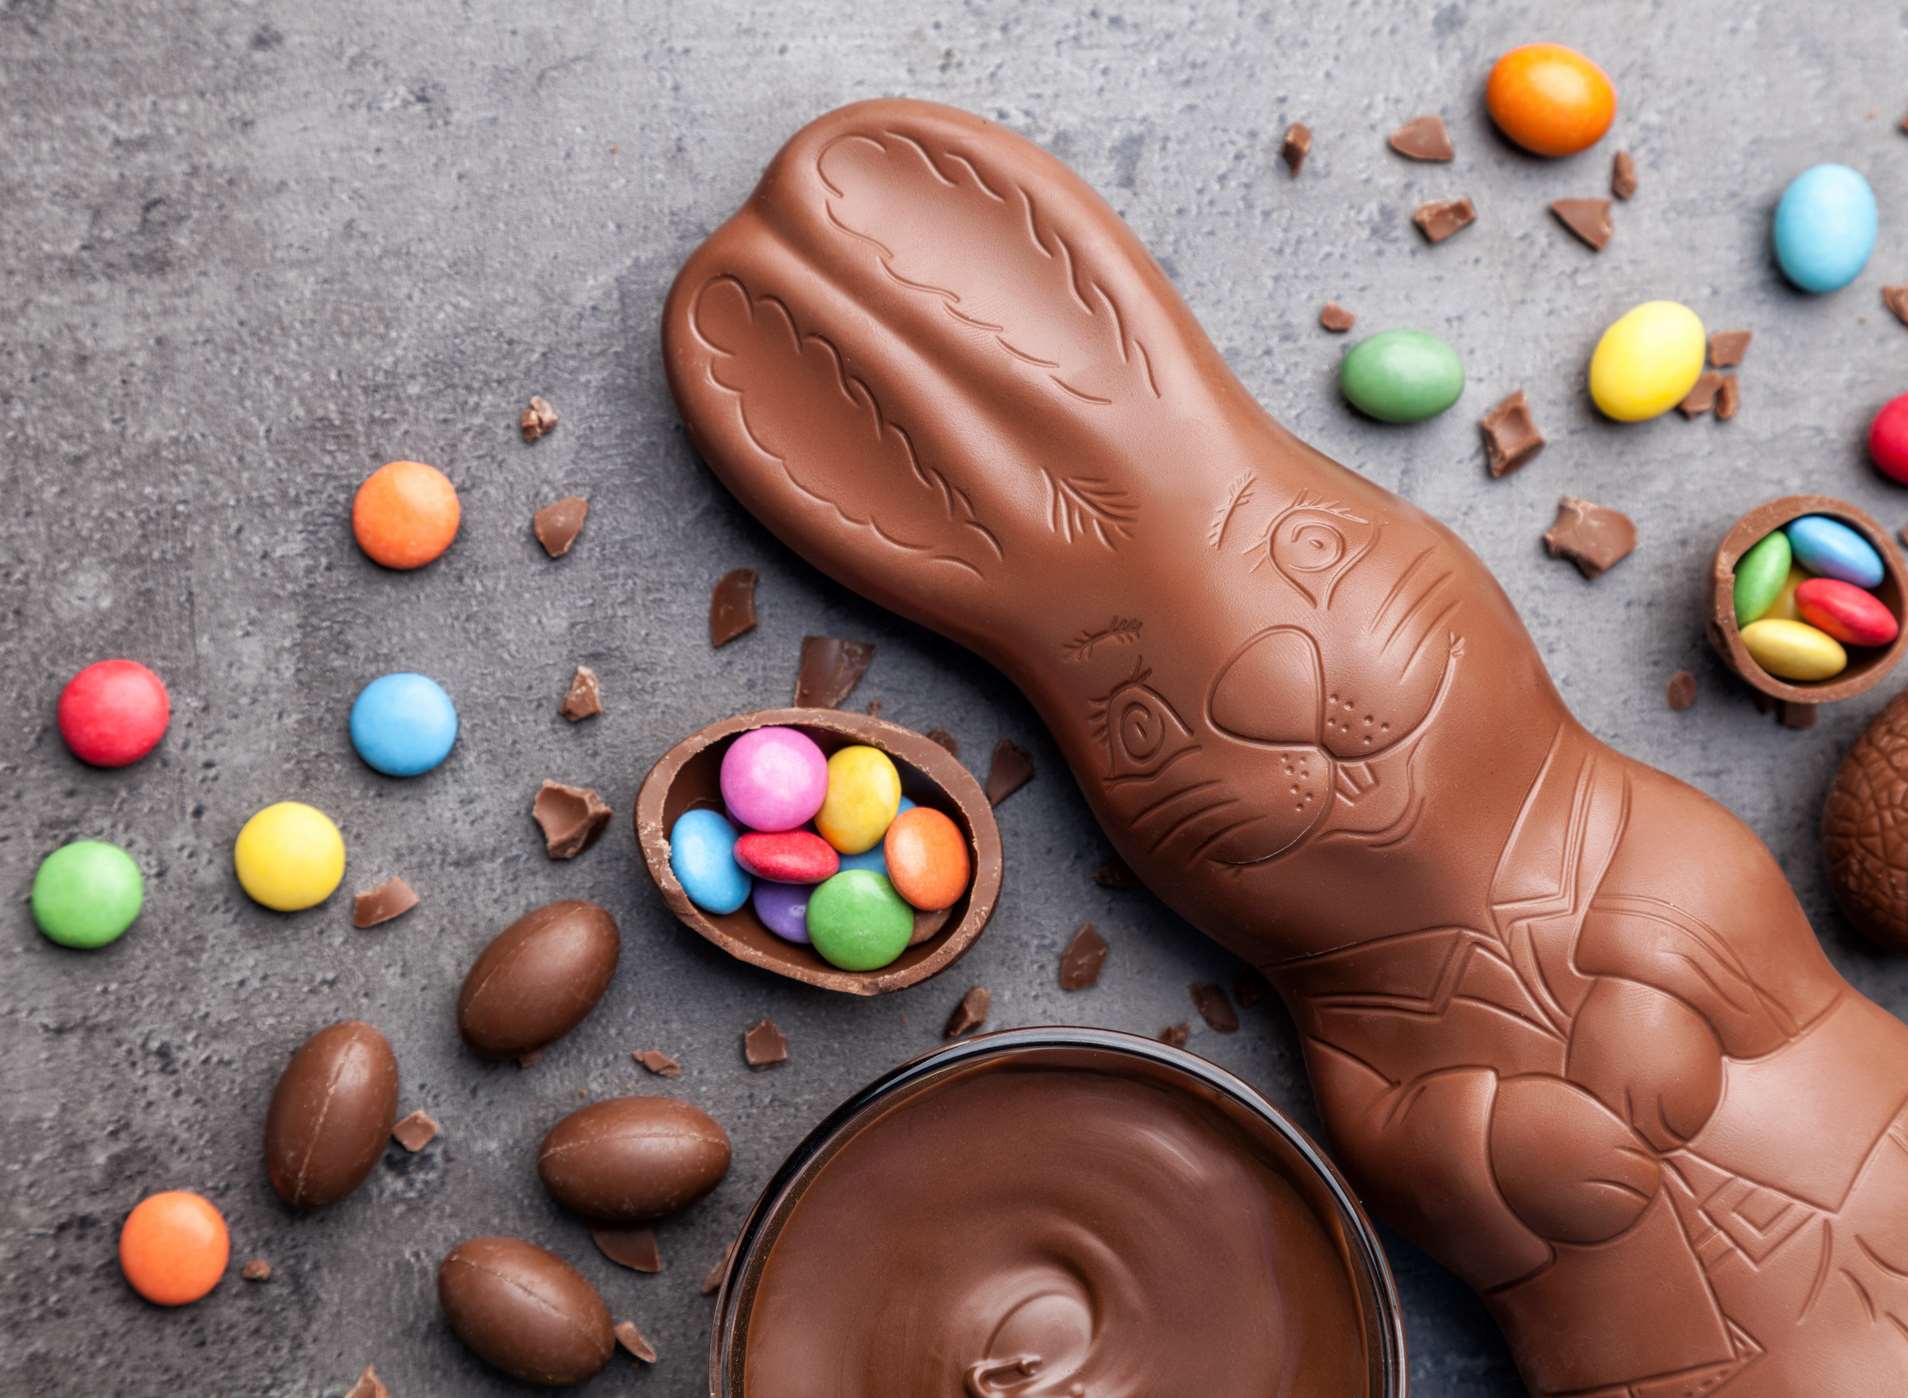 Happy Easter to all our readers